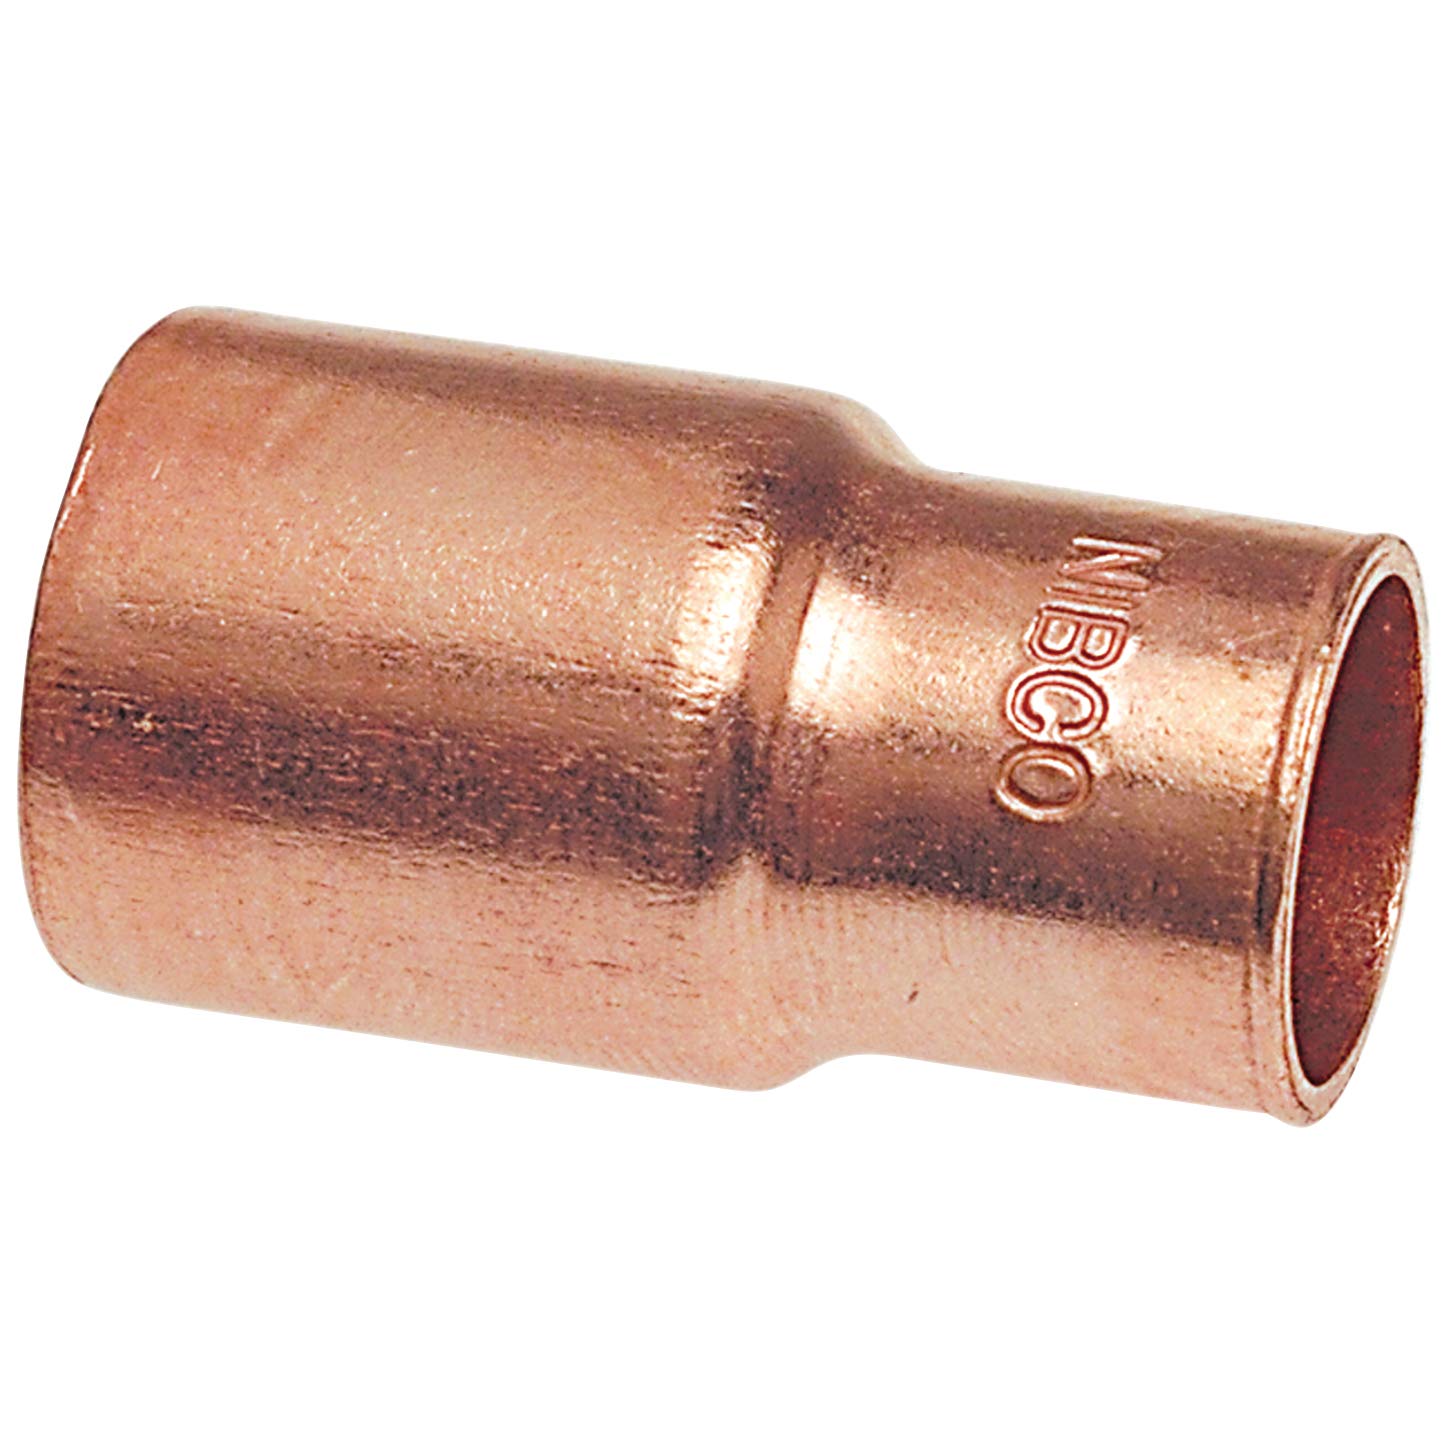 1-1/4" x 1" Fitting Reducer Ftg x C - Wrot Copper, 600-2